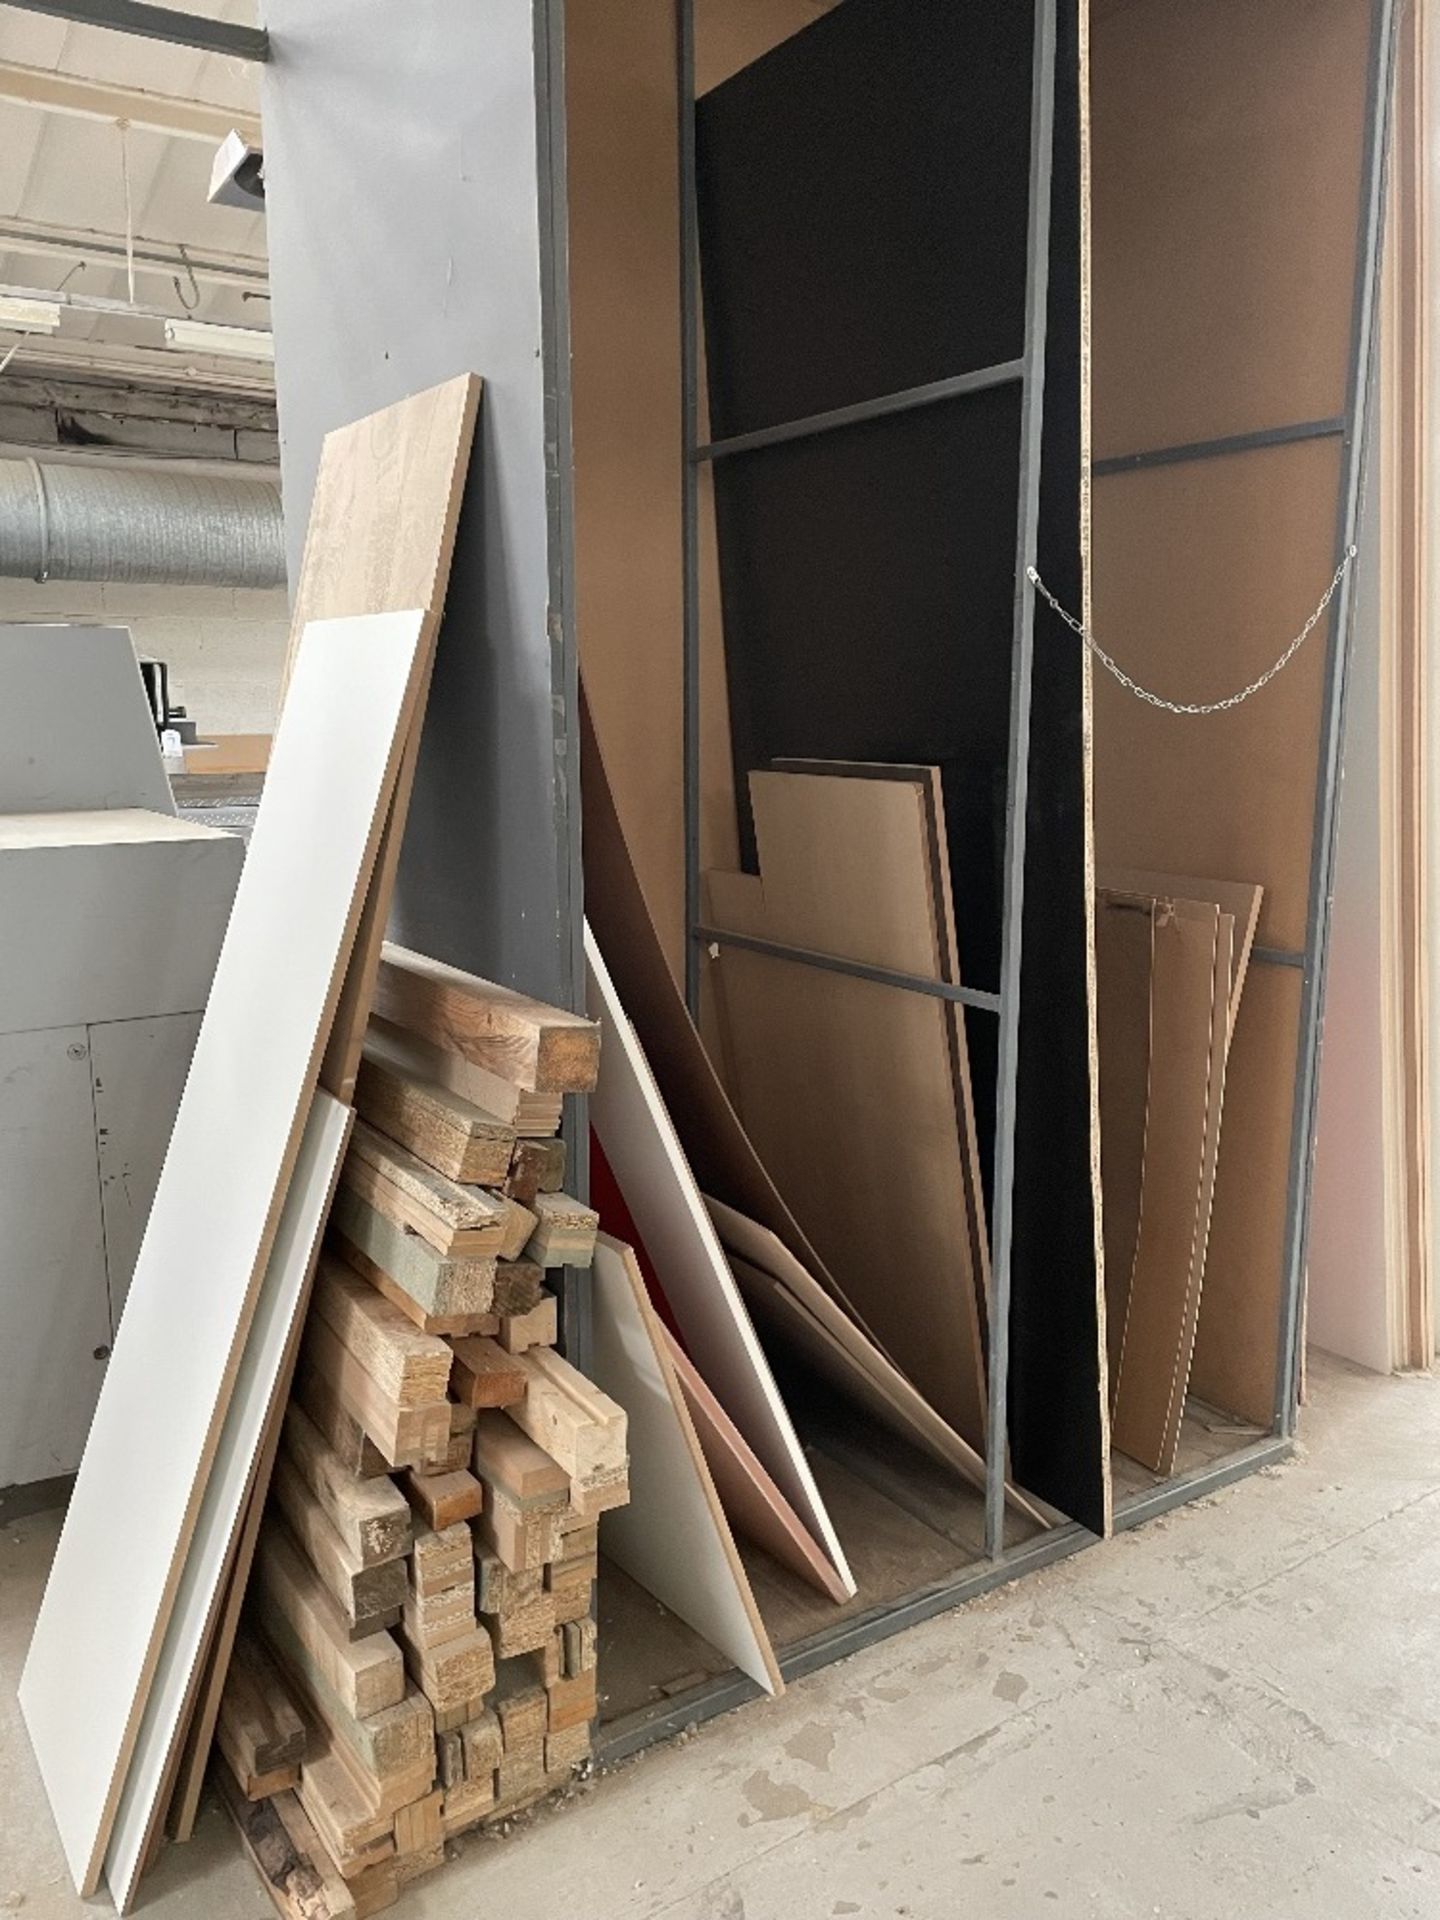 Quantity of Various Laminated Plywood/MDF Sheets - As Pictured - Image 4 of 5